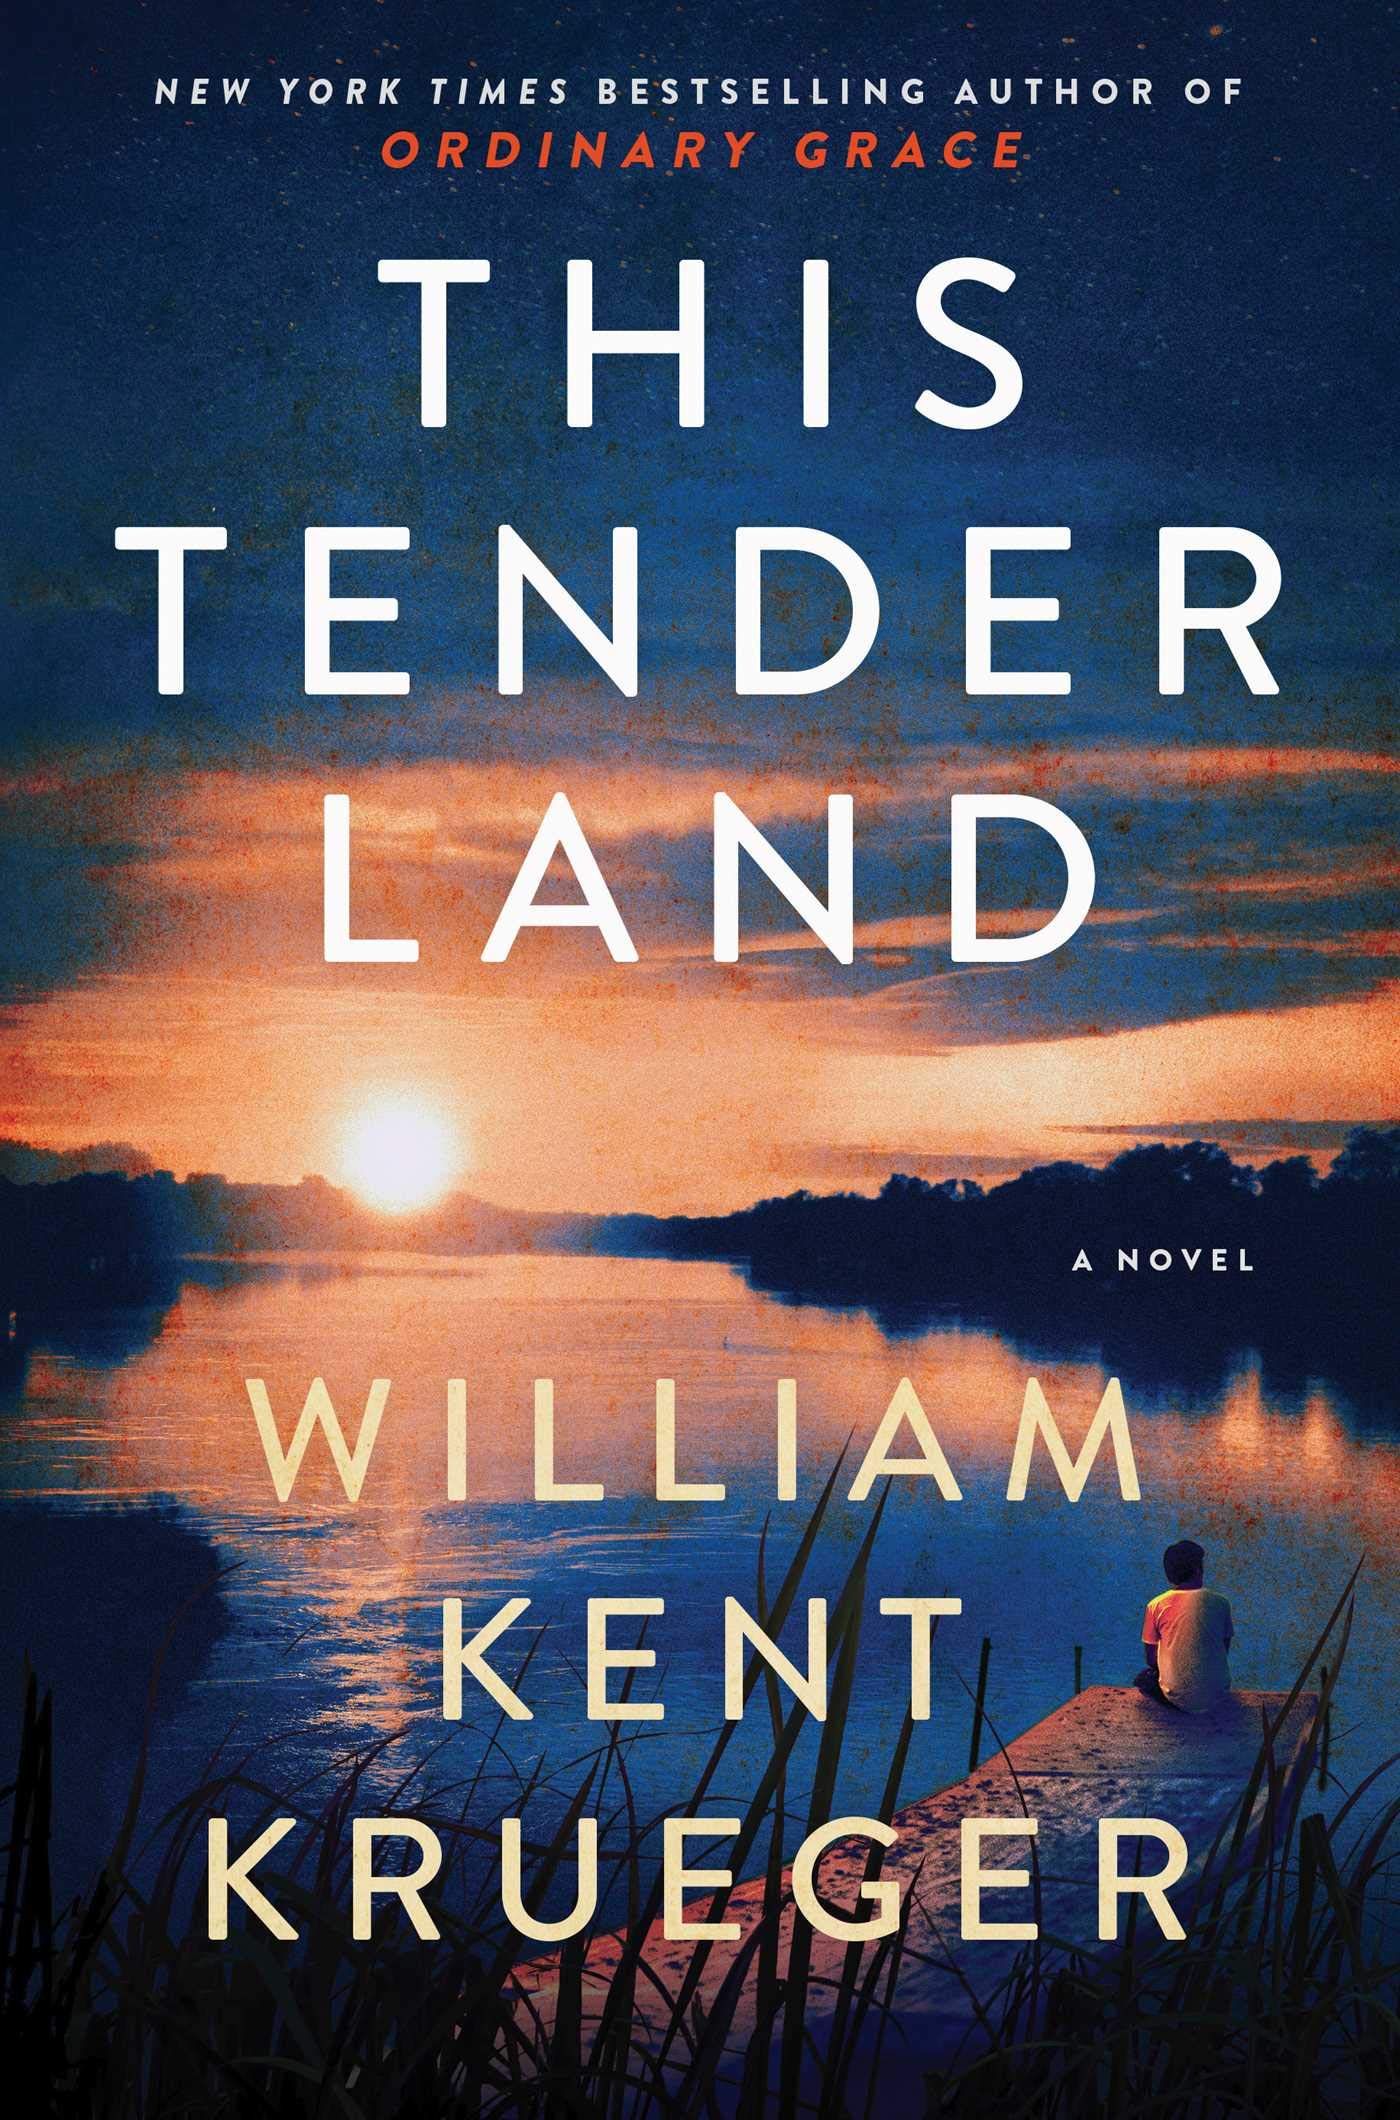 Image for "This tender land"